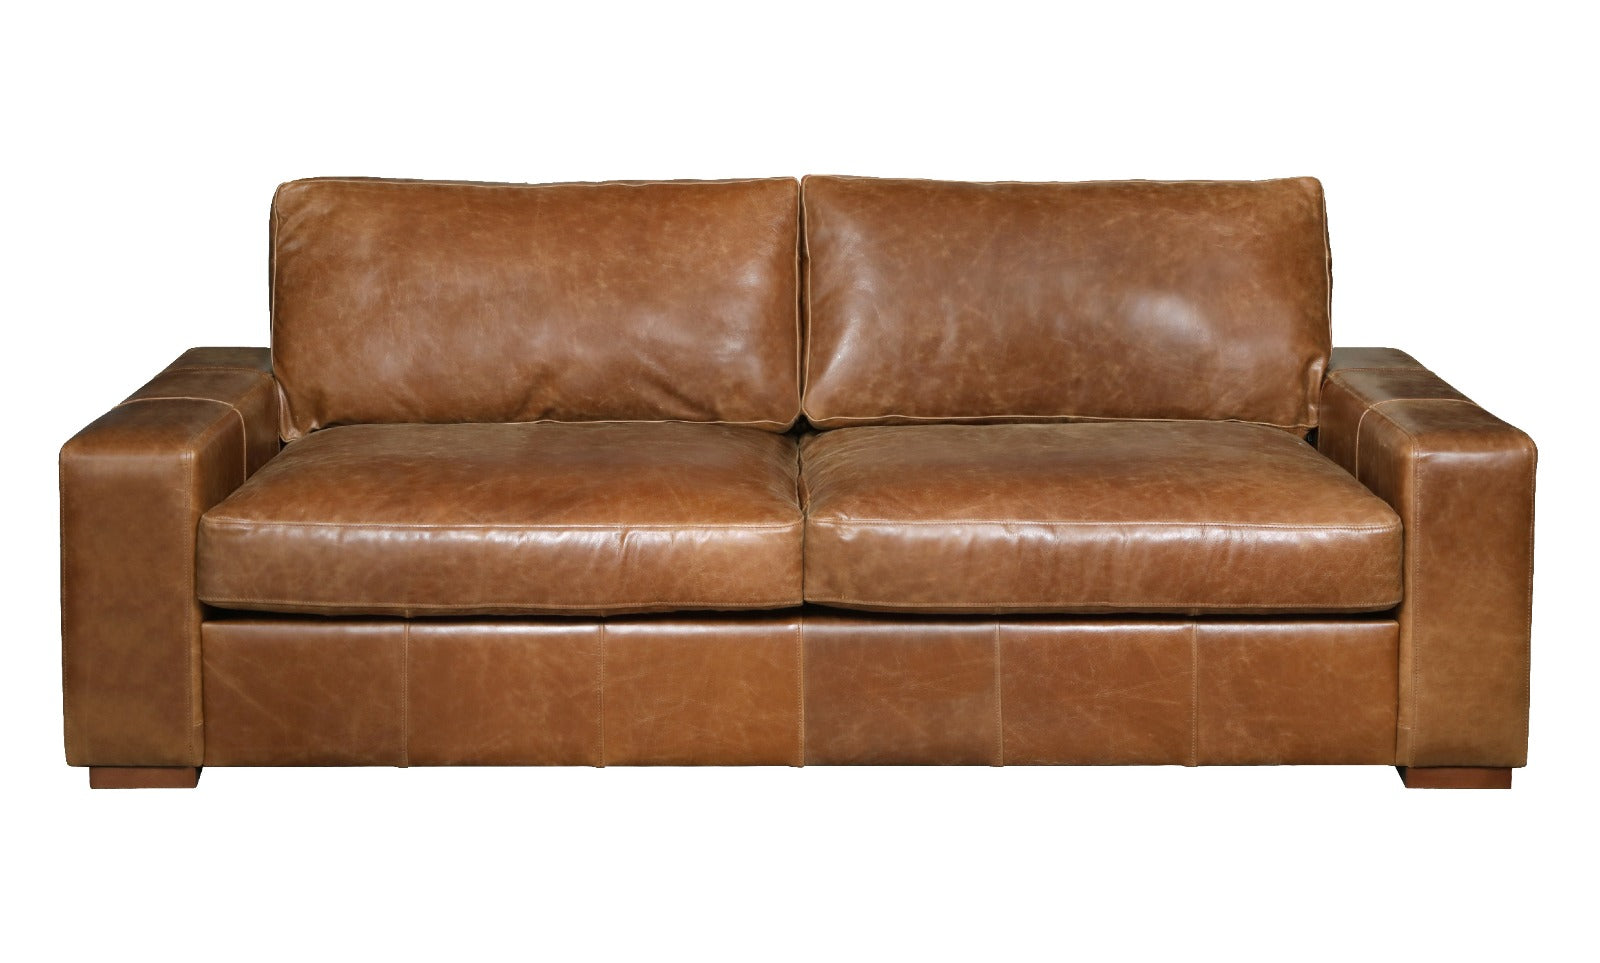 Maximus 3 seater leather sofa from Top Secret Furniture, Holmes Chapel